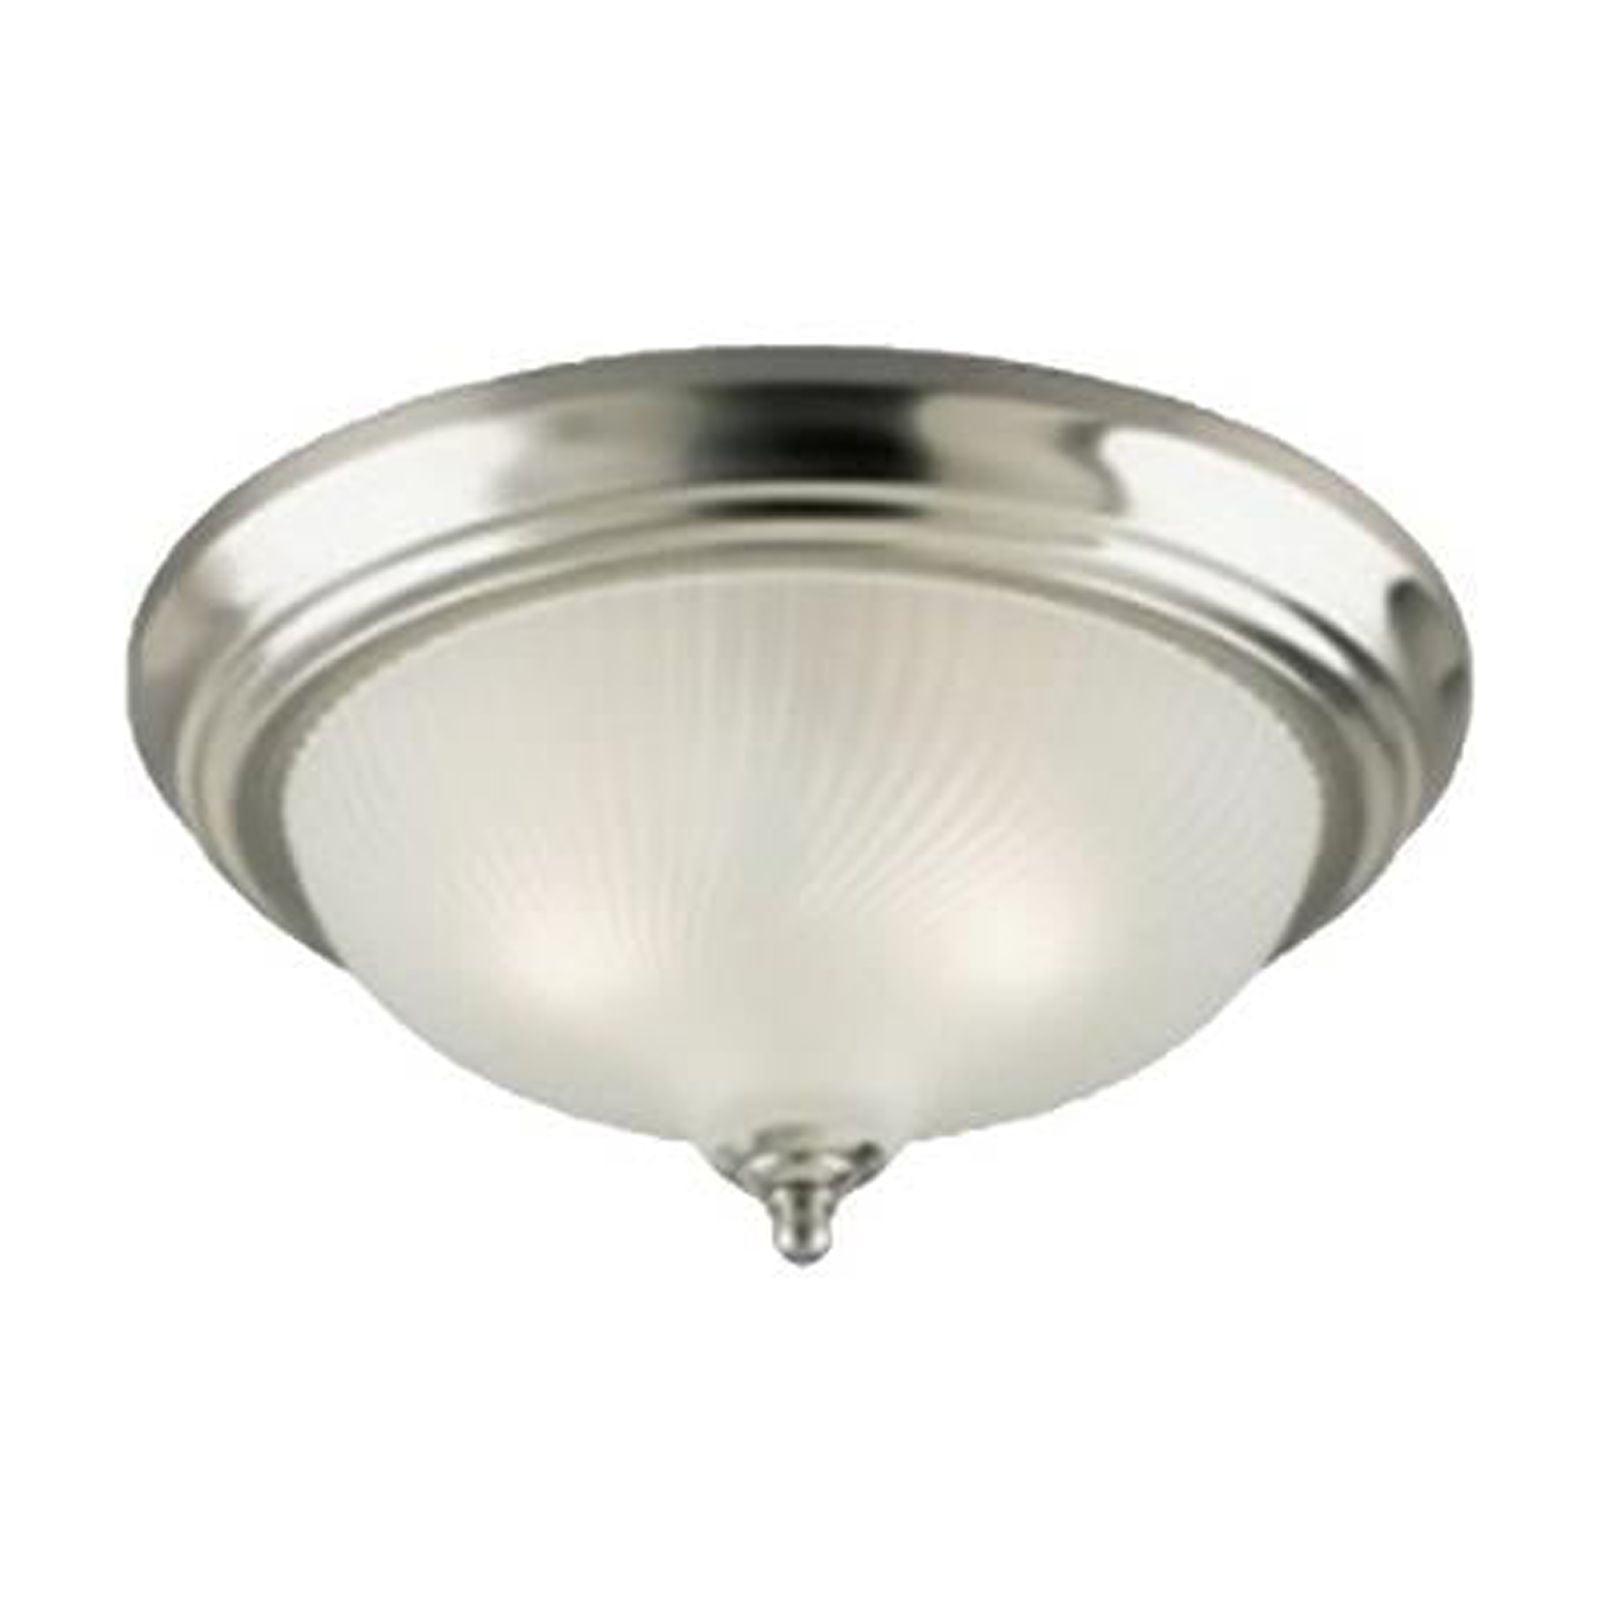 13" Brushed Nickel and Frosted Glass Flush Mount Ceiling Light